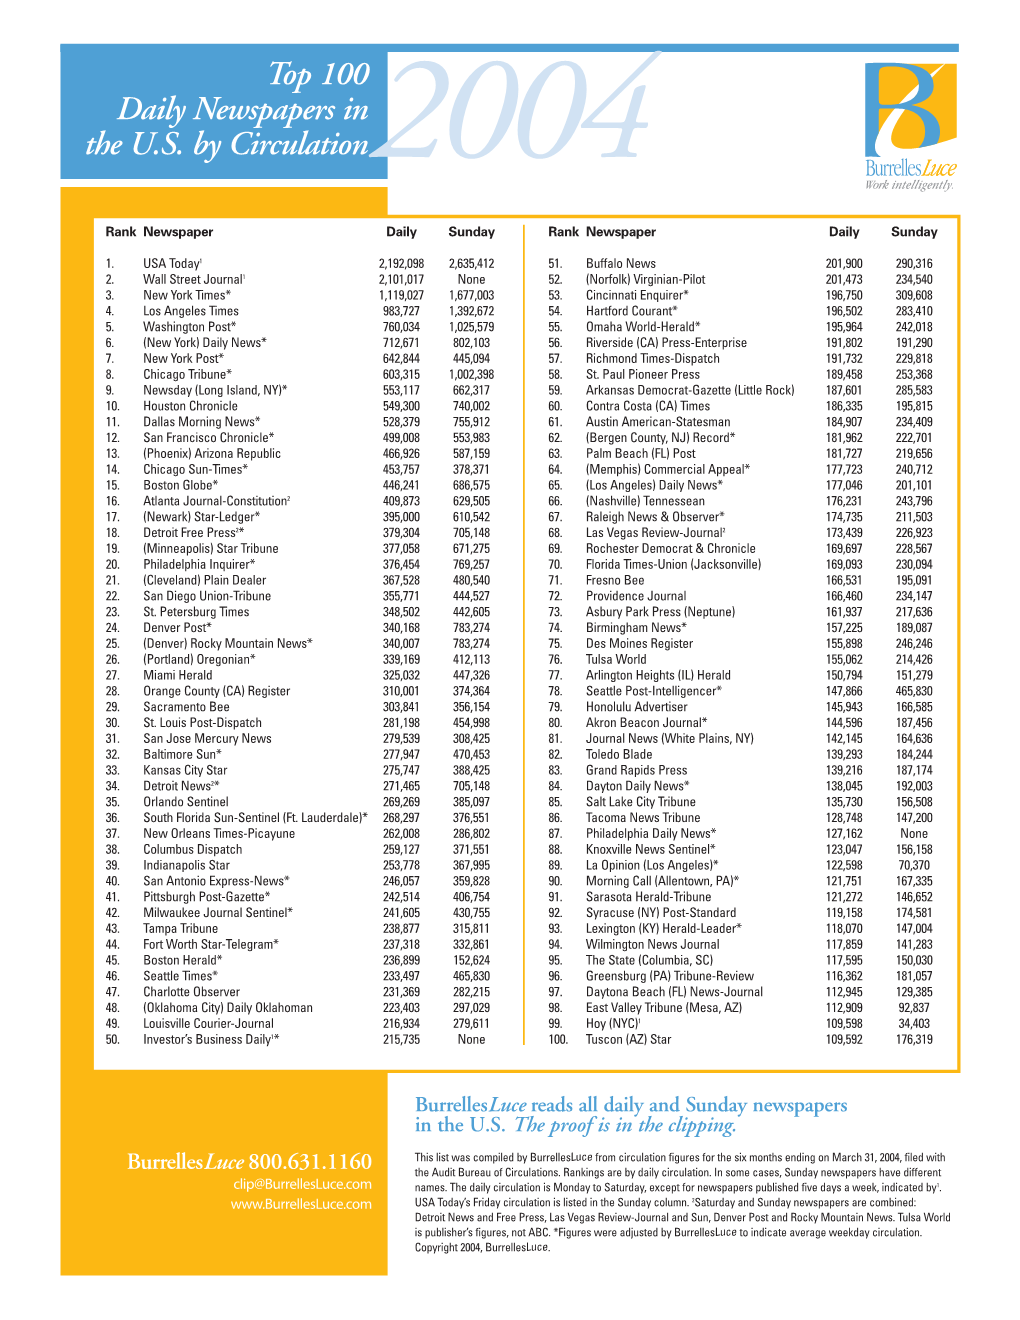 Top 100 Daily Newspapers in the U.S. by Circulation2004